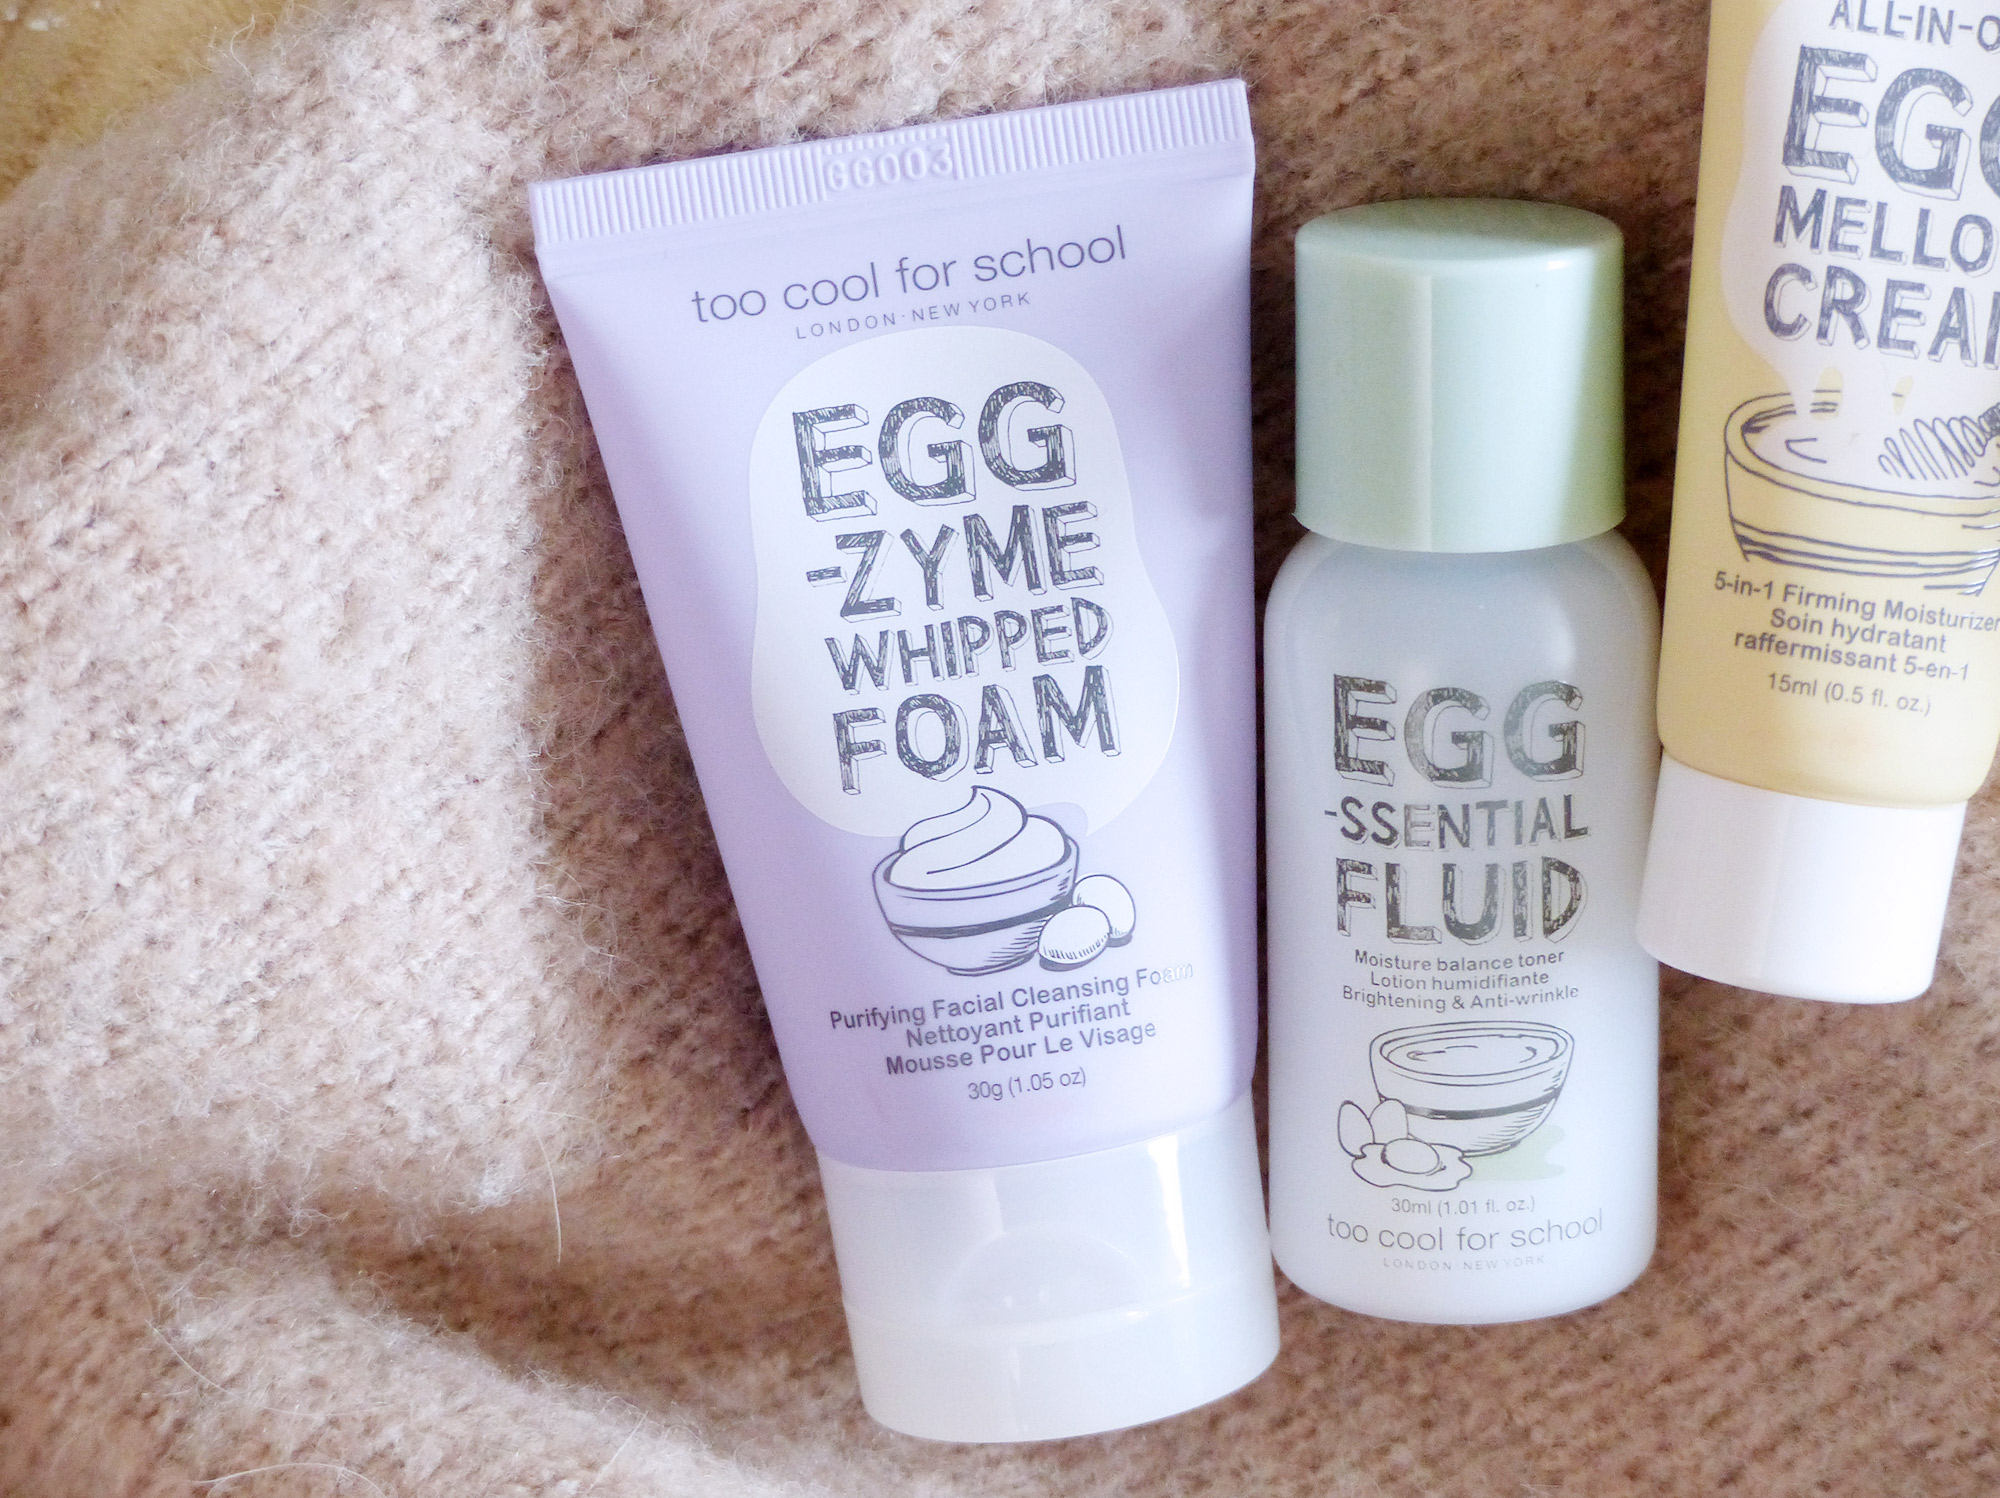 Too Cool For School Egg Zyme Whipped foam - Autour de Marine